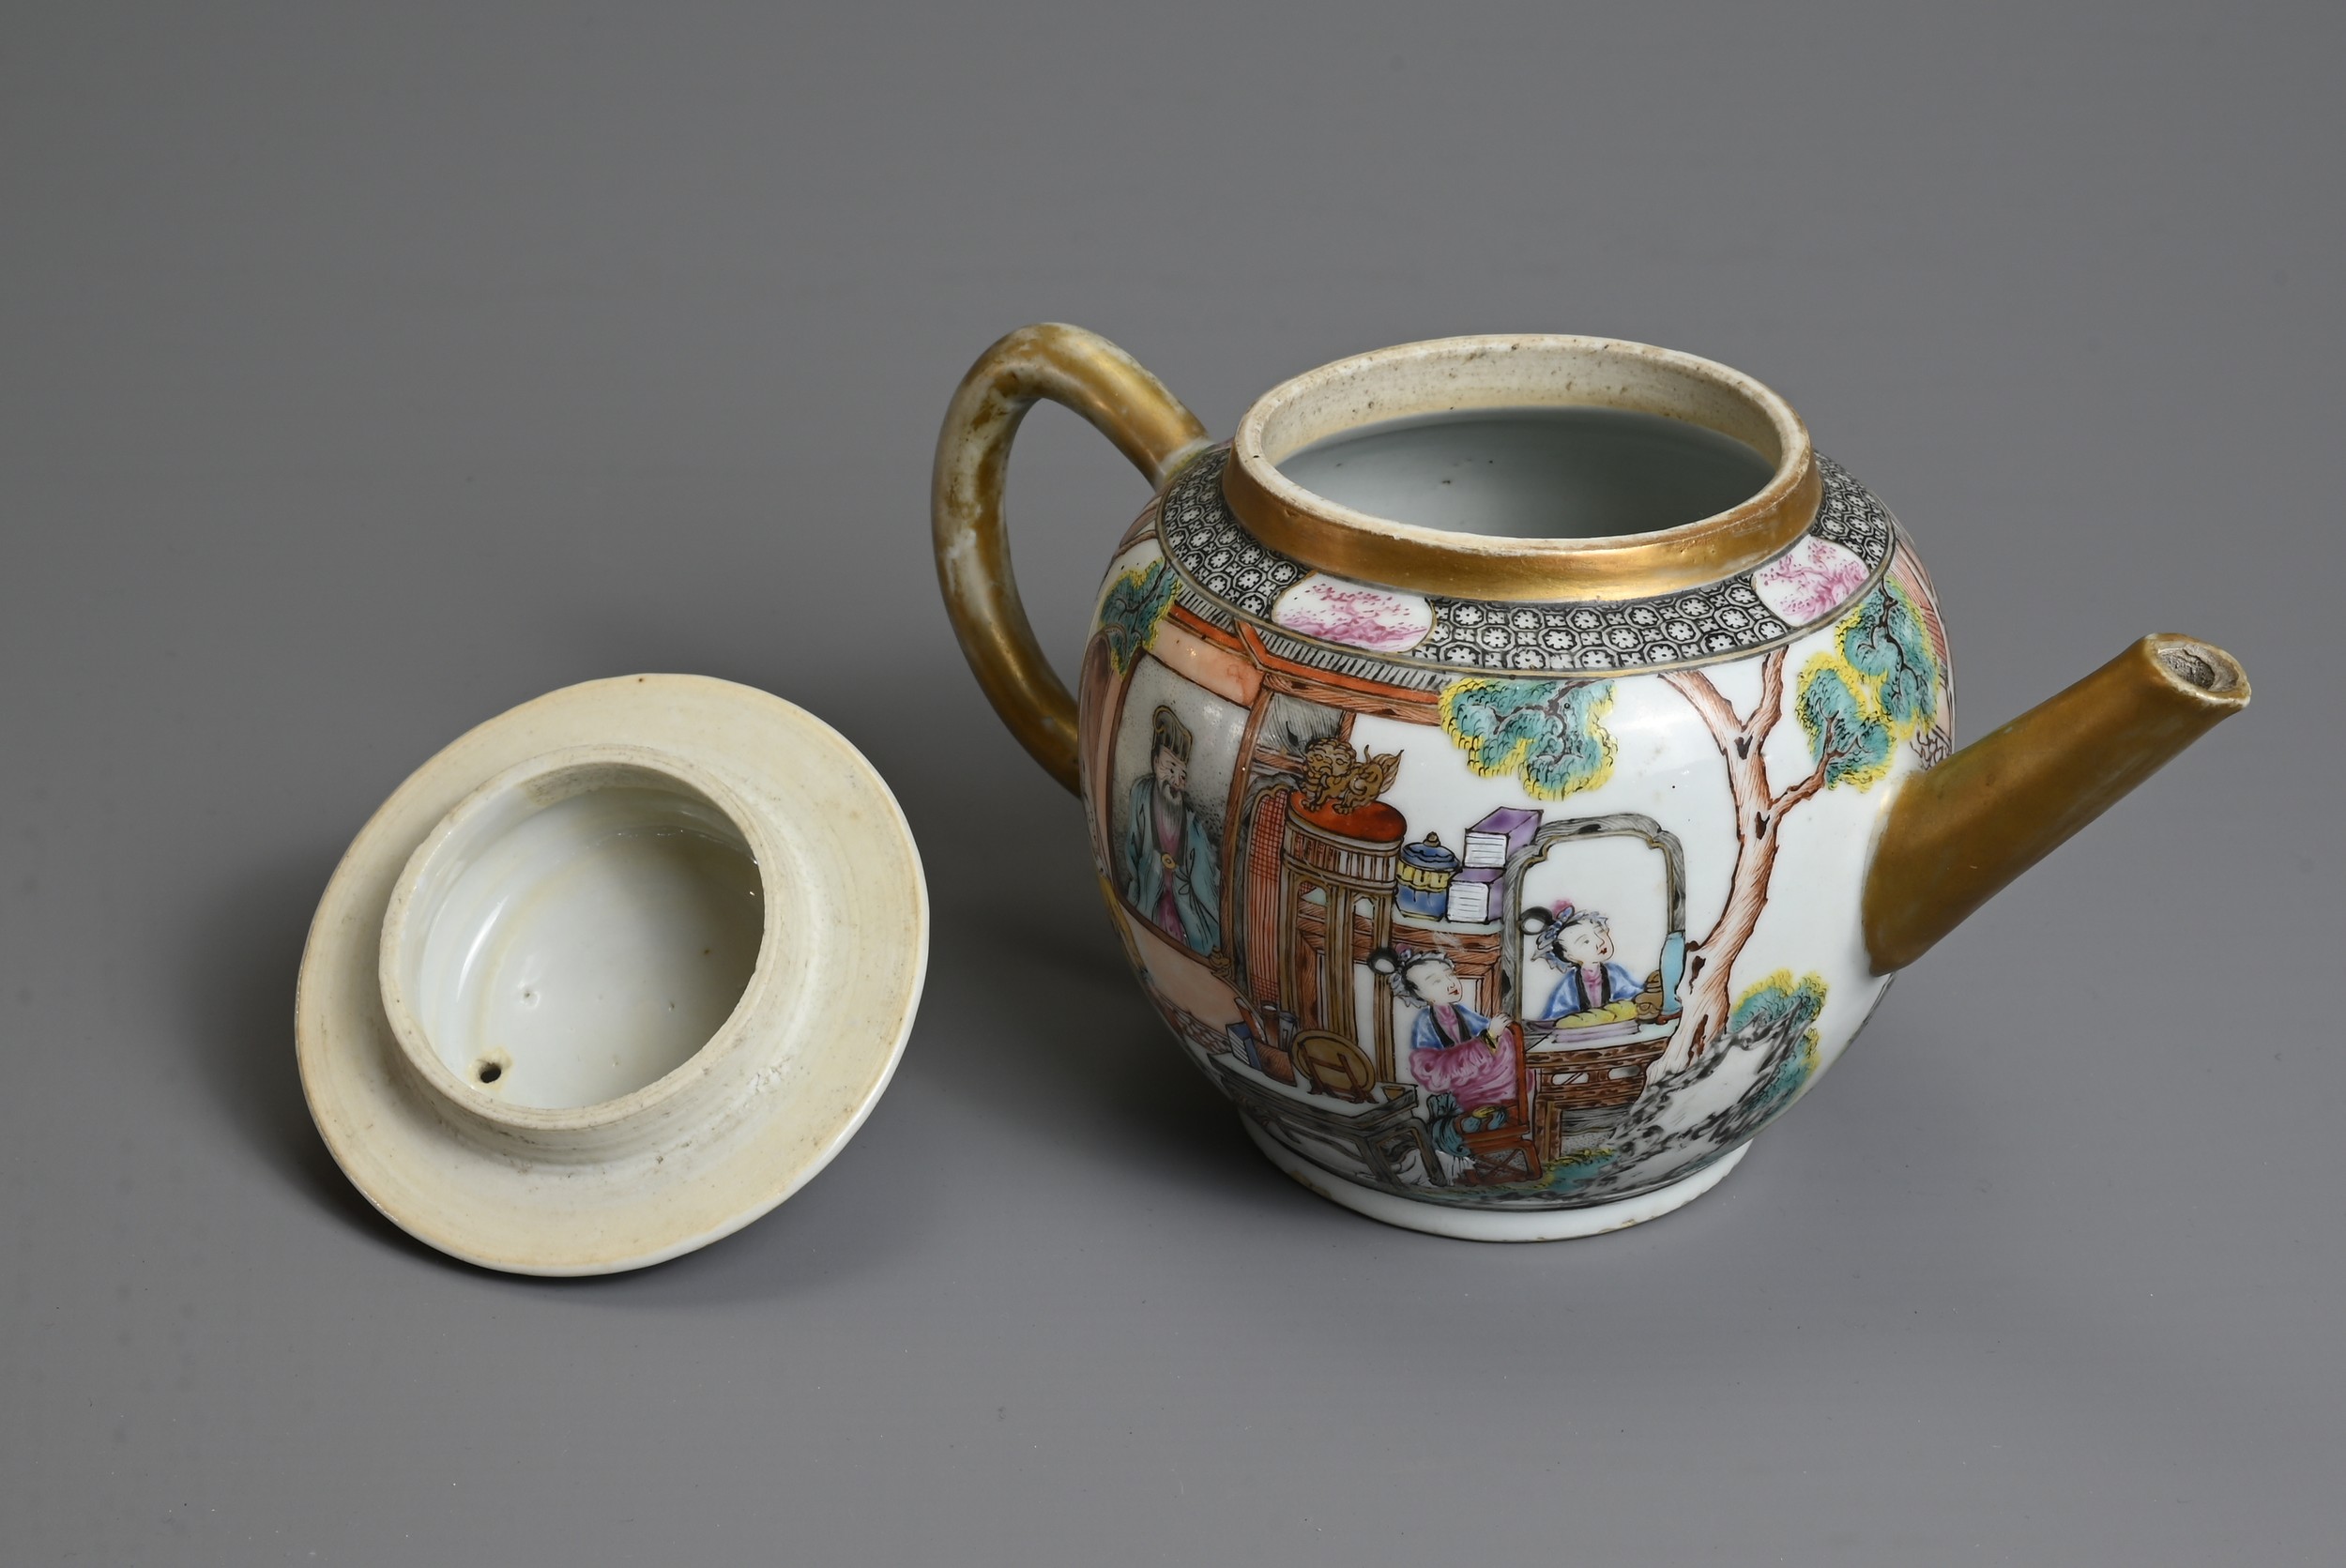 A FINE CHINESE FAMILLE ROSE PORCELAIN TEAPOT, 18TH CENTURY - Image 7 of 21